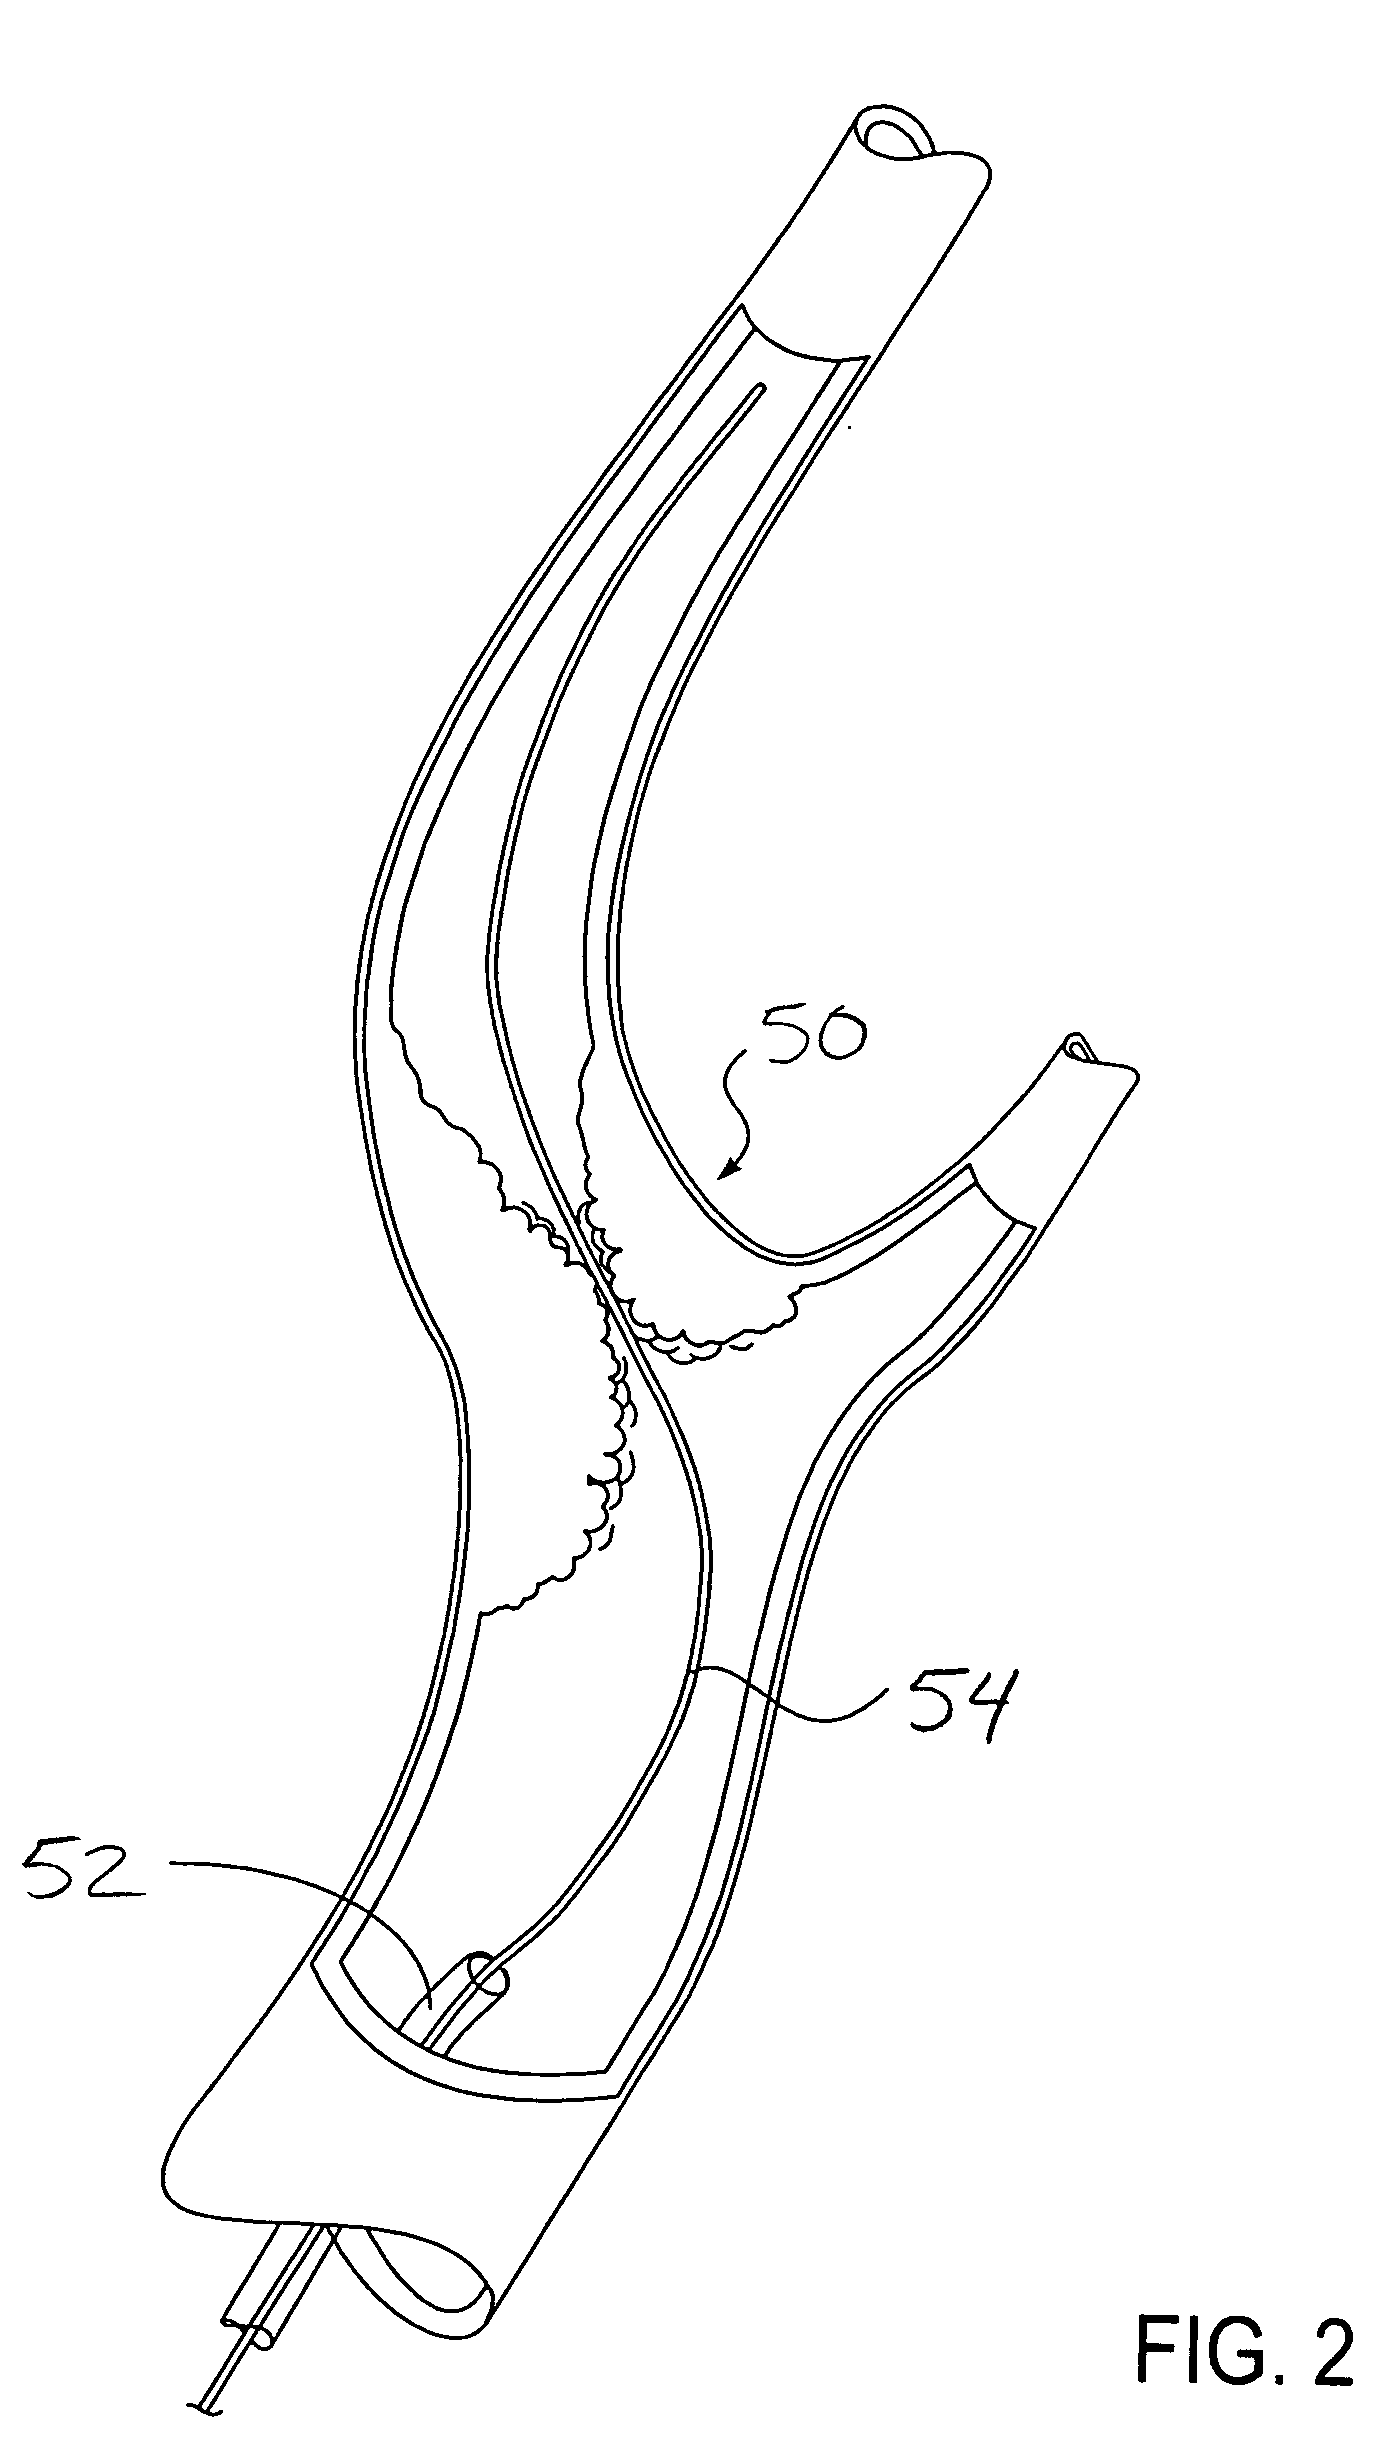 Catheter system for protected angioplasty and stenting at a carotid bifurcation